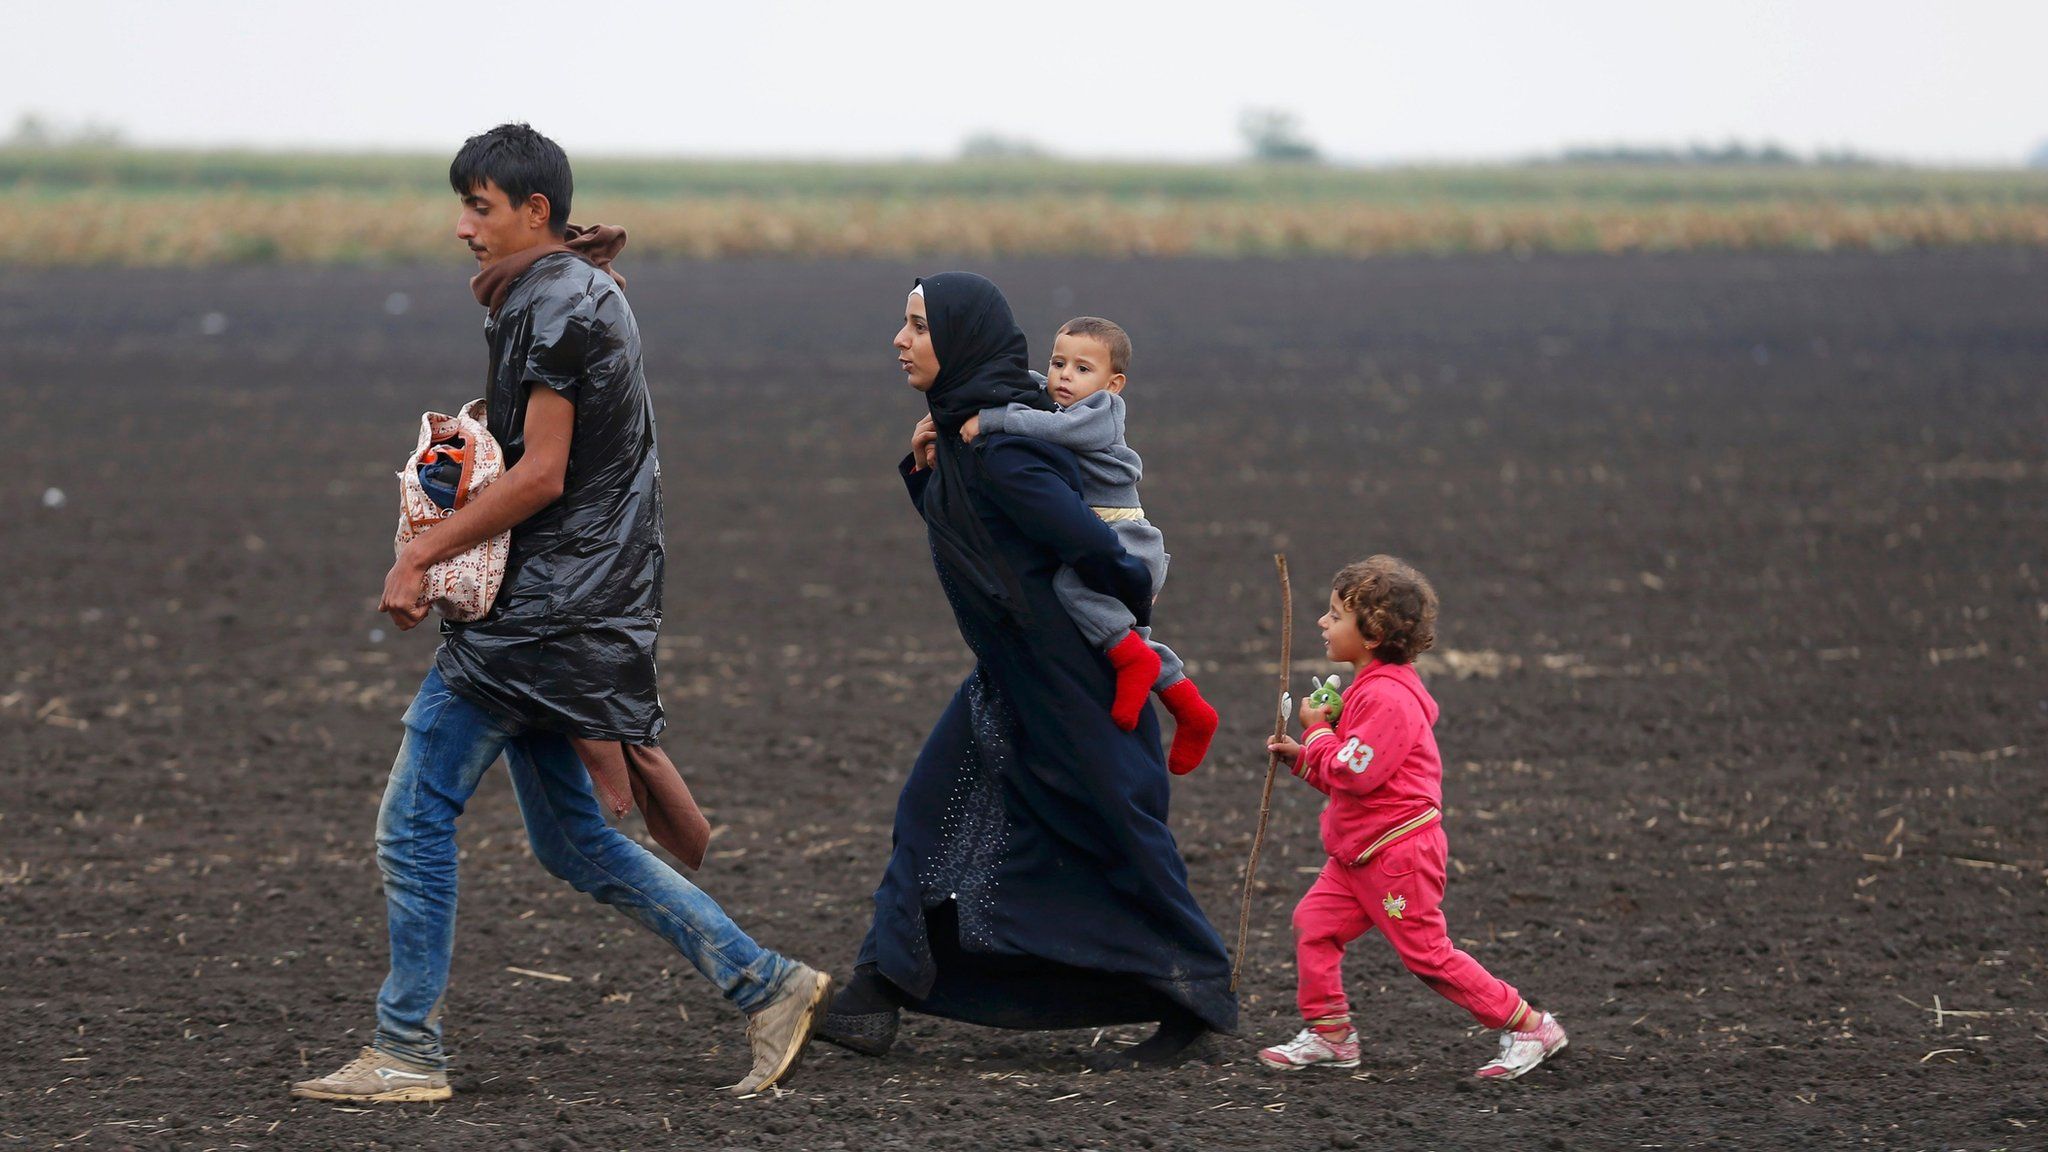 Migrants walk through a field in Roszke, Hungary, on 11 September 2015